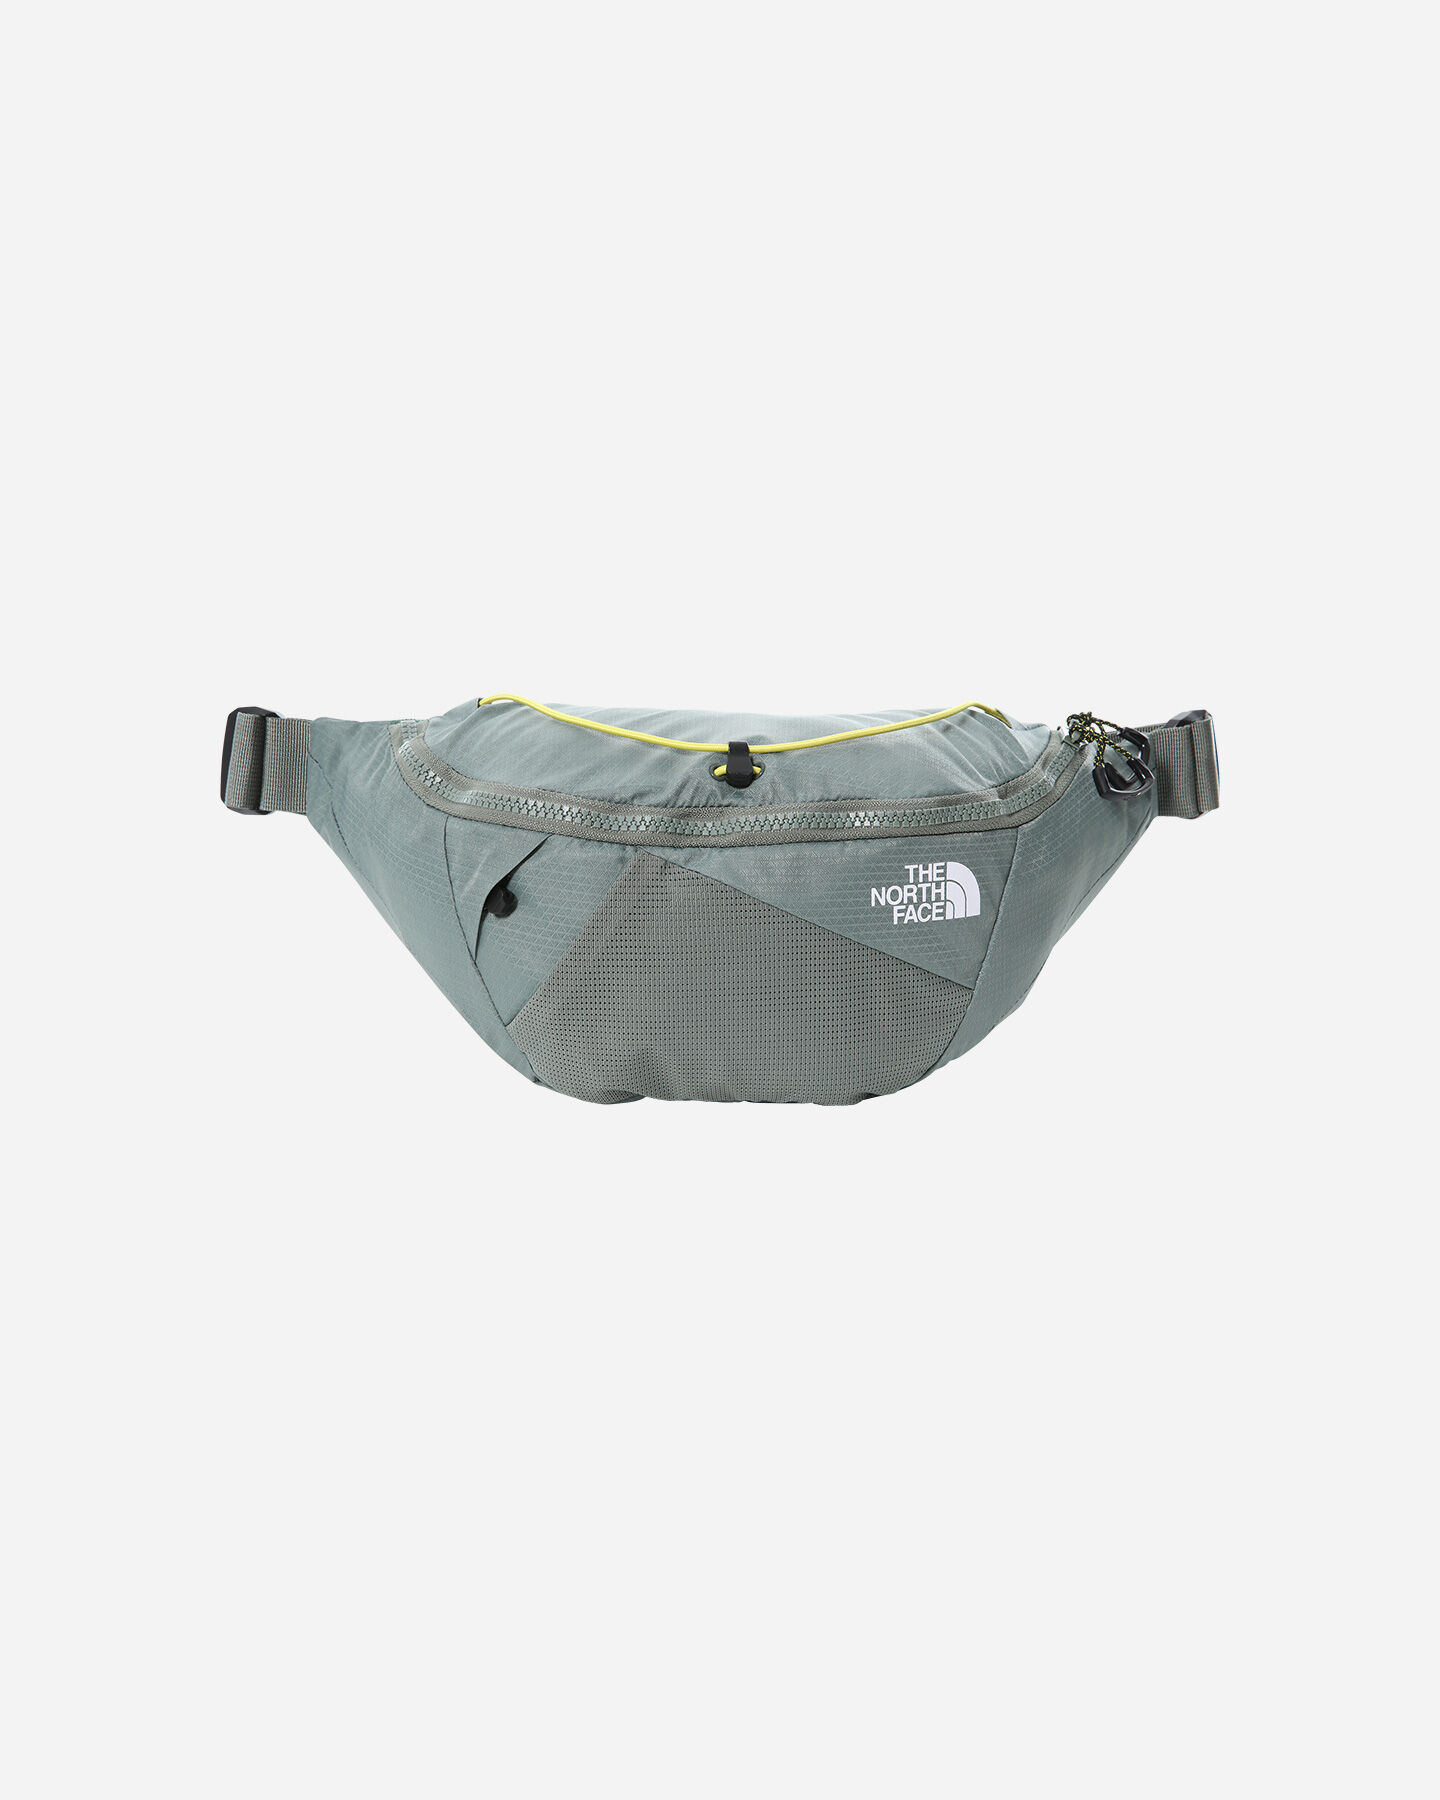  Marsupio THE NORTH FACE LUMBNICAL TG.S S5292499|YRB|OS scatto 0